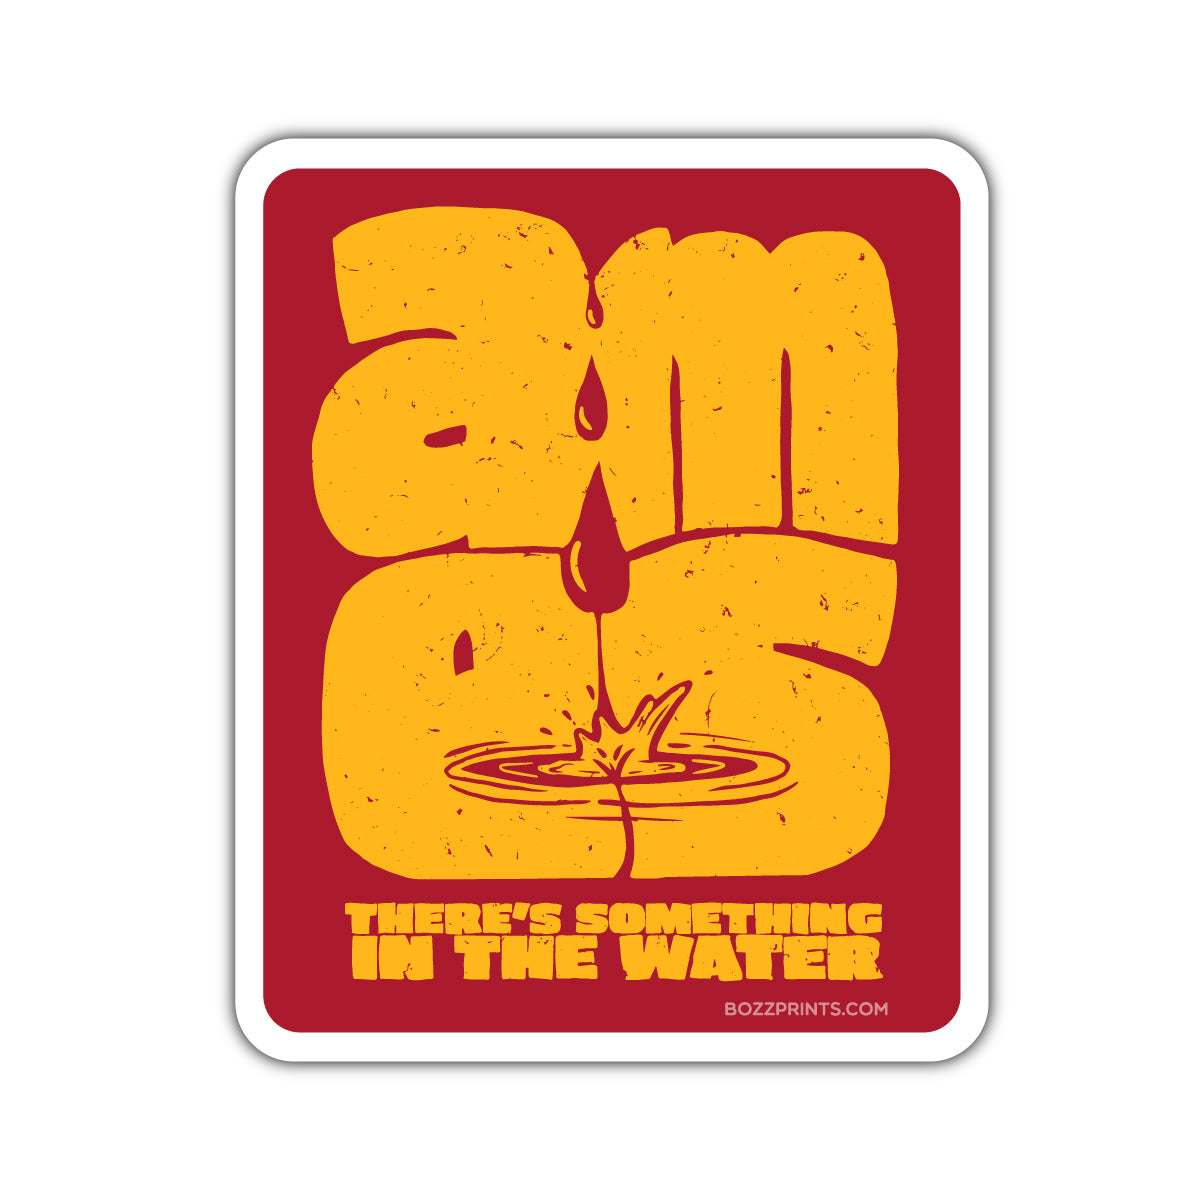 Ames Something in the Water - Bozz Prints